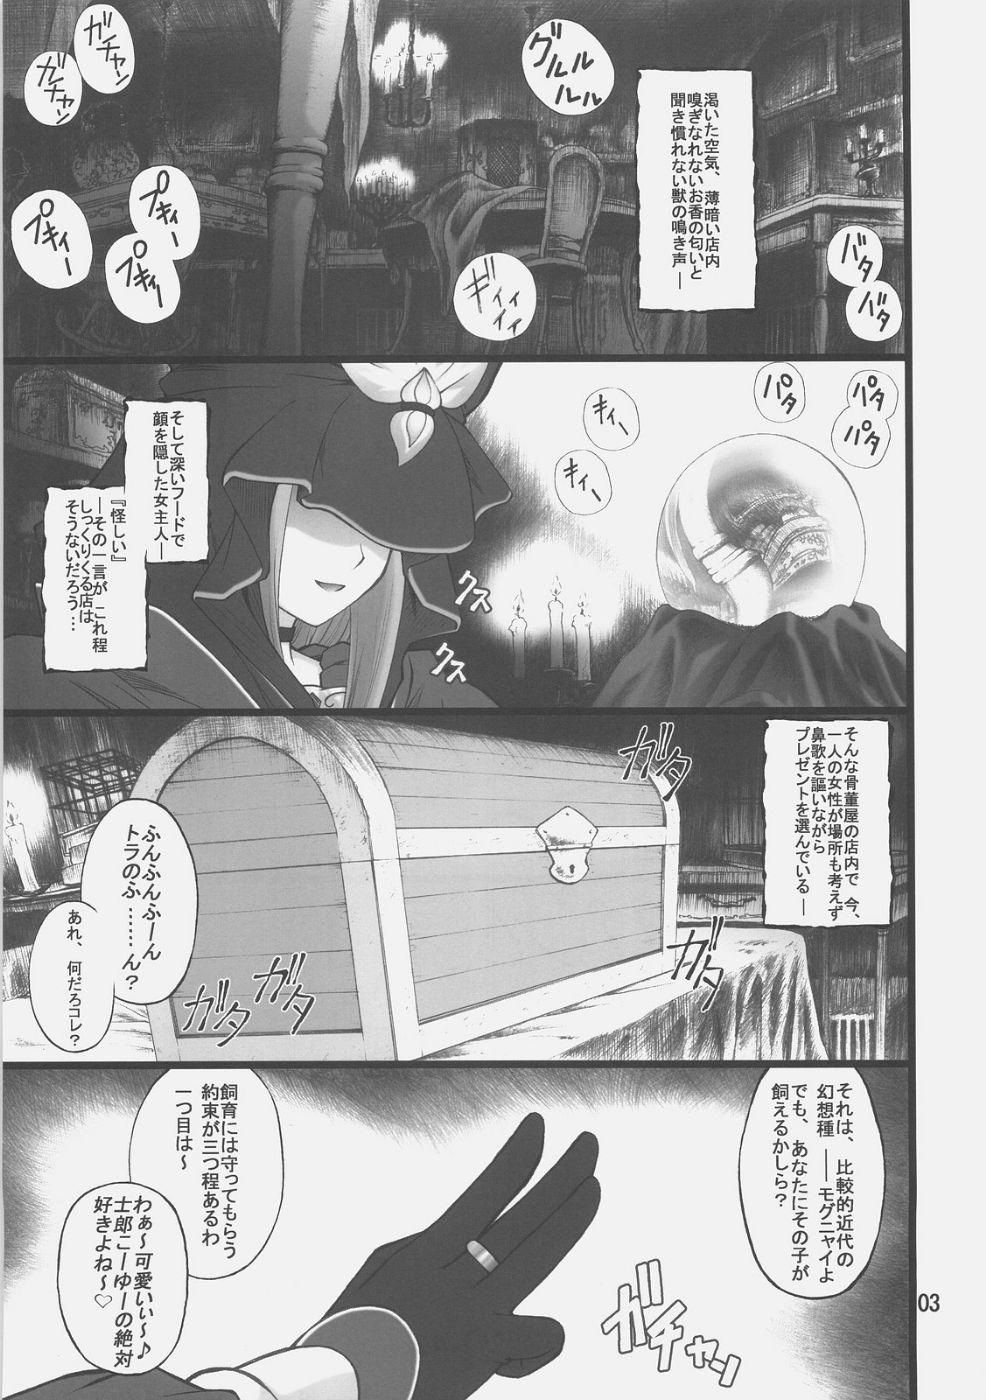 Bokep Grem-Rin 1 - Fate stay night Indonesian - Page 2